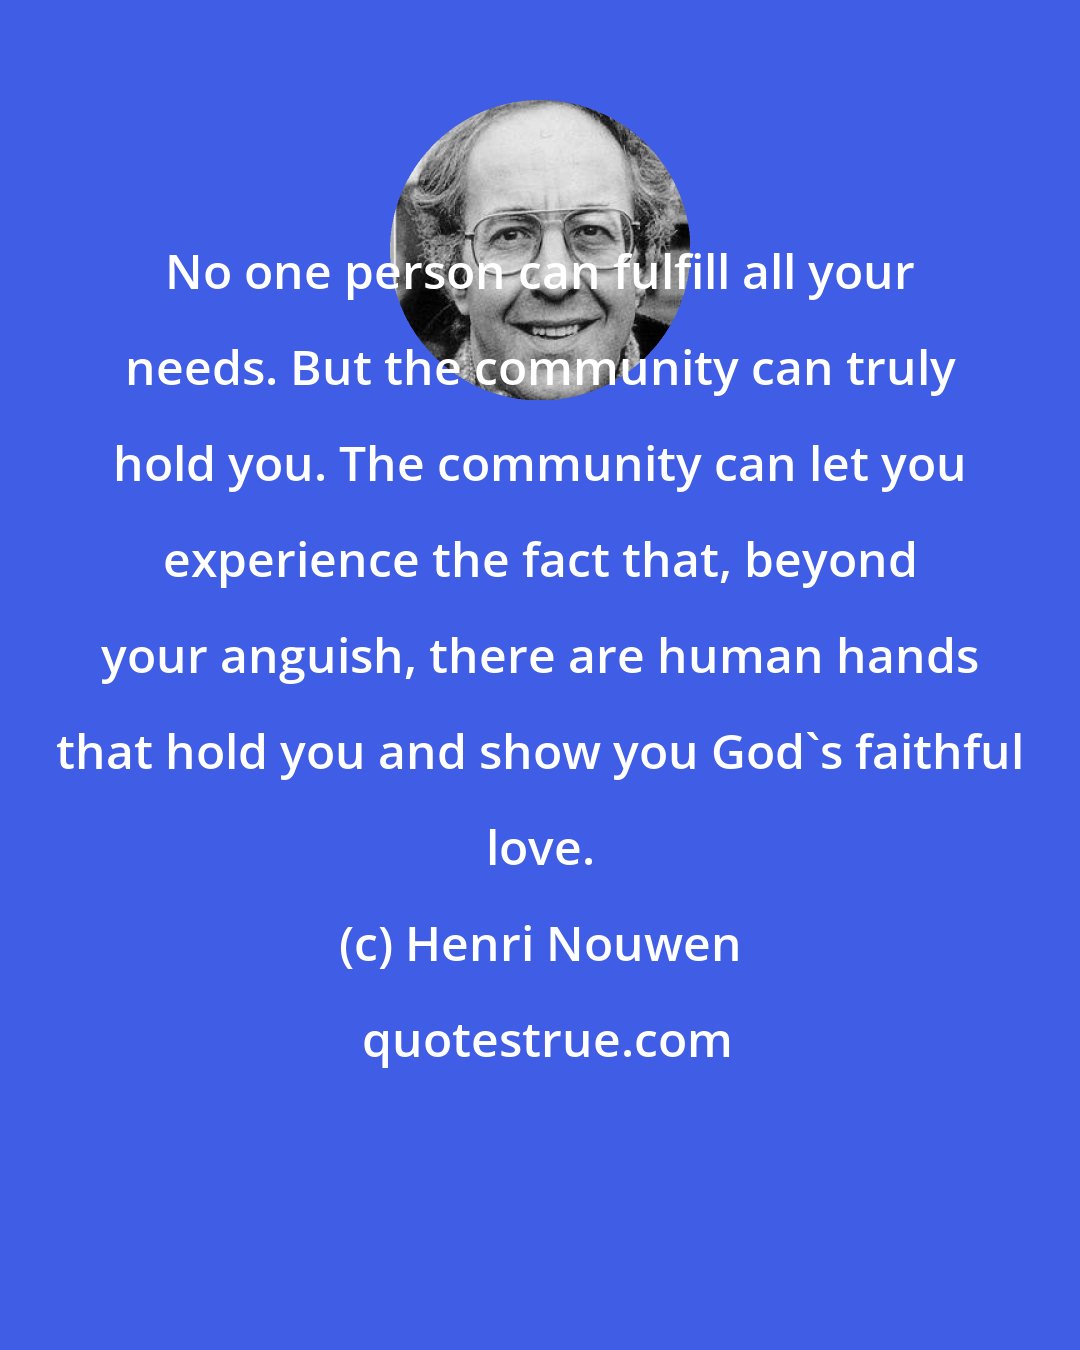 Henri Nouwen: No one person can fulfill all your needs. But the community can truly hold you. The community can let you experience the fact that, beyond your anguish, there are human hands that hold you and show you God's faithful love.